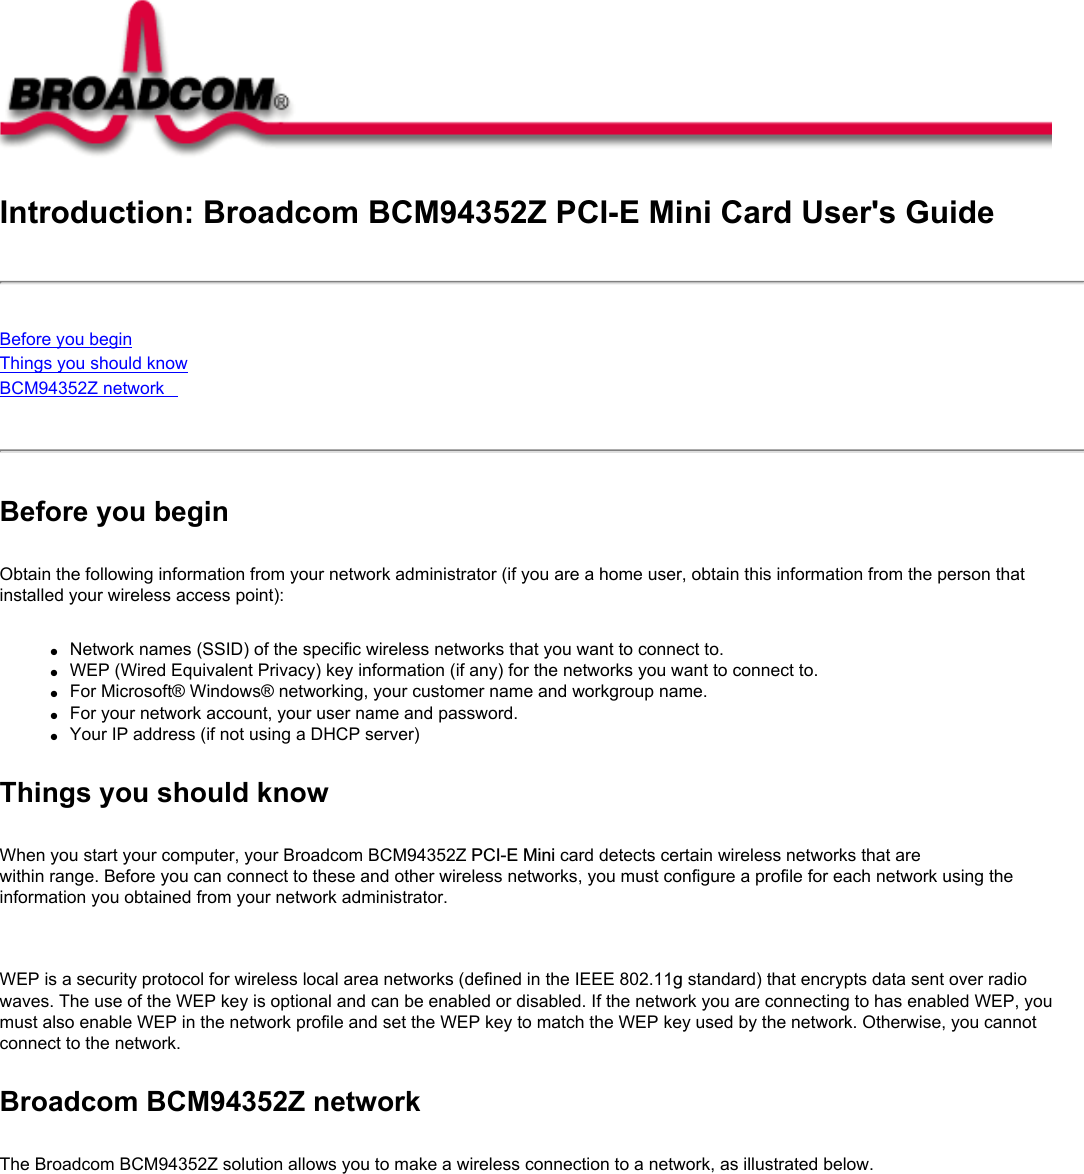 Introduction: Broadcom BCM94352Z PCI-E Mini Card User&apos;s GuideBefore you beginThings you should knowBCM94352Z network Before you beginObtain the following information from your network administrator (if you are a home user, obtain this information from the person that installed your wireless access point):●     Network names (SSID) of the specific wireless networks that you want to connect to.●     WEP (Wired Equivalent Privacy) key information (if any) for the networks you want to connect to.●     For Microsoft® Windows® networking, your customer name and workgroup name.●     For your network account, your user name and password.●     Your IP address (if not using a DHCP server)Things you should knowWhen you start your computer, your Broadcom BCM94352Z PCI-E Mini card detects certain wireless networks that are within range. Before you can connect to these and other wireless networks, you must configure a profile for each network using the information you obtained from your network administrator.   WEP is a security protocol for wireless local area networks (defined in the IEEE 802.11g standard) that encrypts data sent over radio waves. The use of the WEP key is optional and can be enabled or disabled. If the network you are connecting to has enabled WEP, you must also enable WEP in the network profile and set the WEP key to match the WEP key used by the network. Otherwise, you cannot connect to the network.Broadcom BCM94352Z networkThe Broadcom BCM94352Z solution allows you to make a wireless connection to a network, as illustrated below.